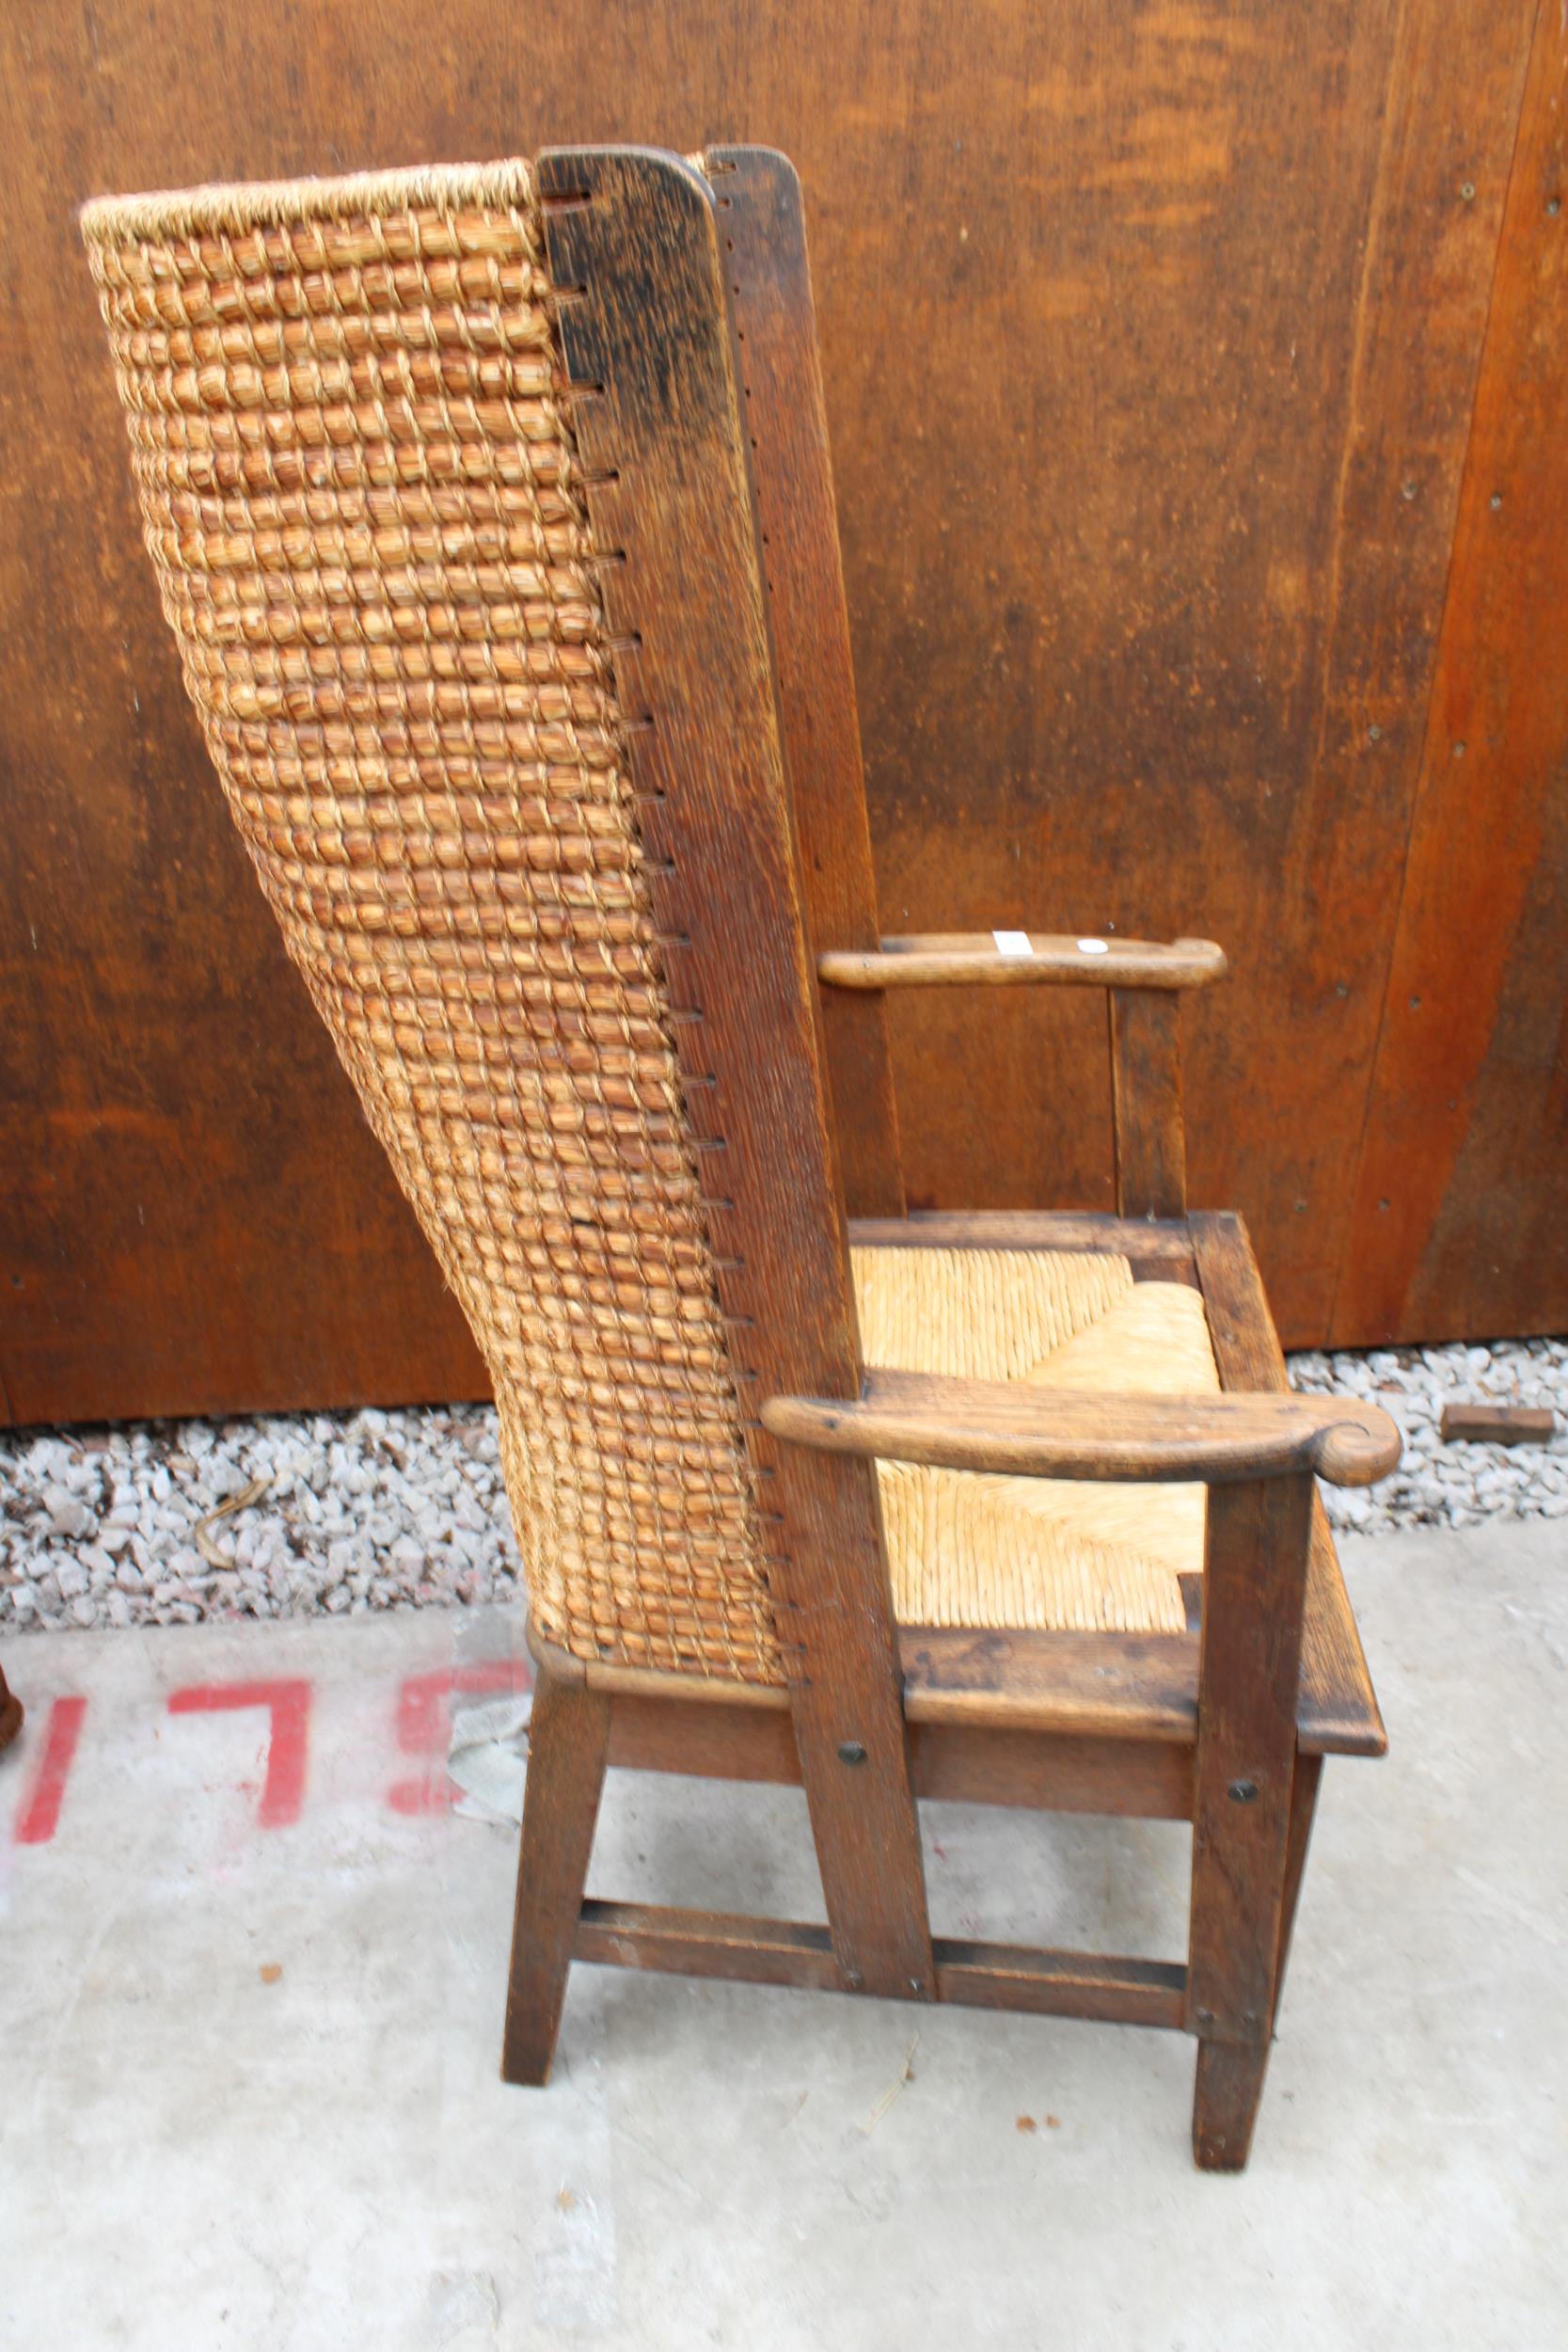 AN OAK ORKNEY CHAIR OF SMALL PROPORTIONS WITH WICKER SEAT AND STITCHED STRAW BACK - Image 2 of 3